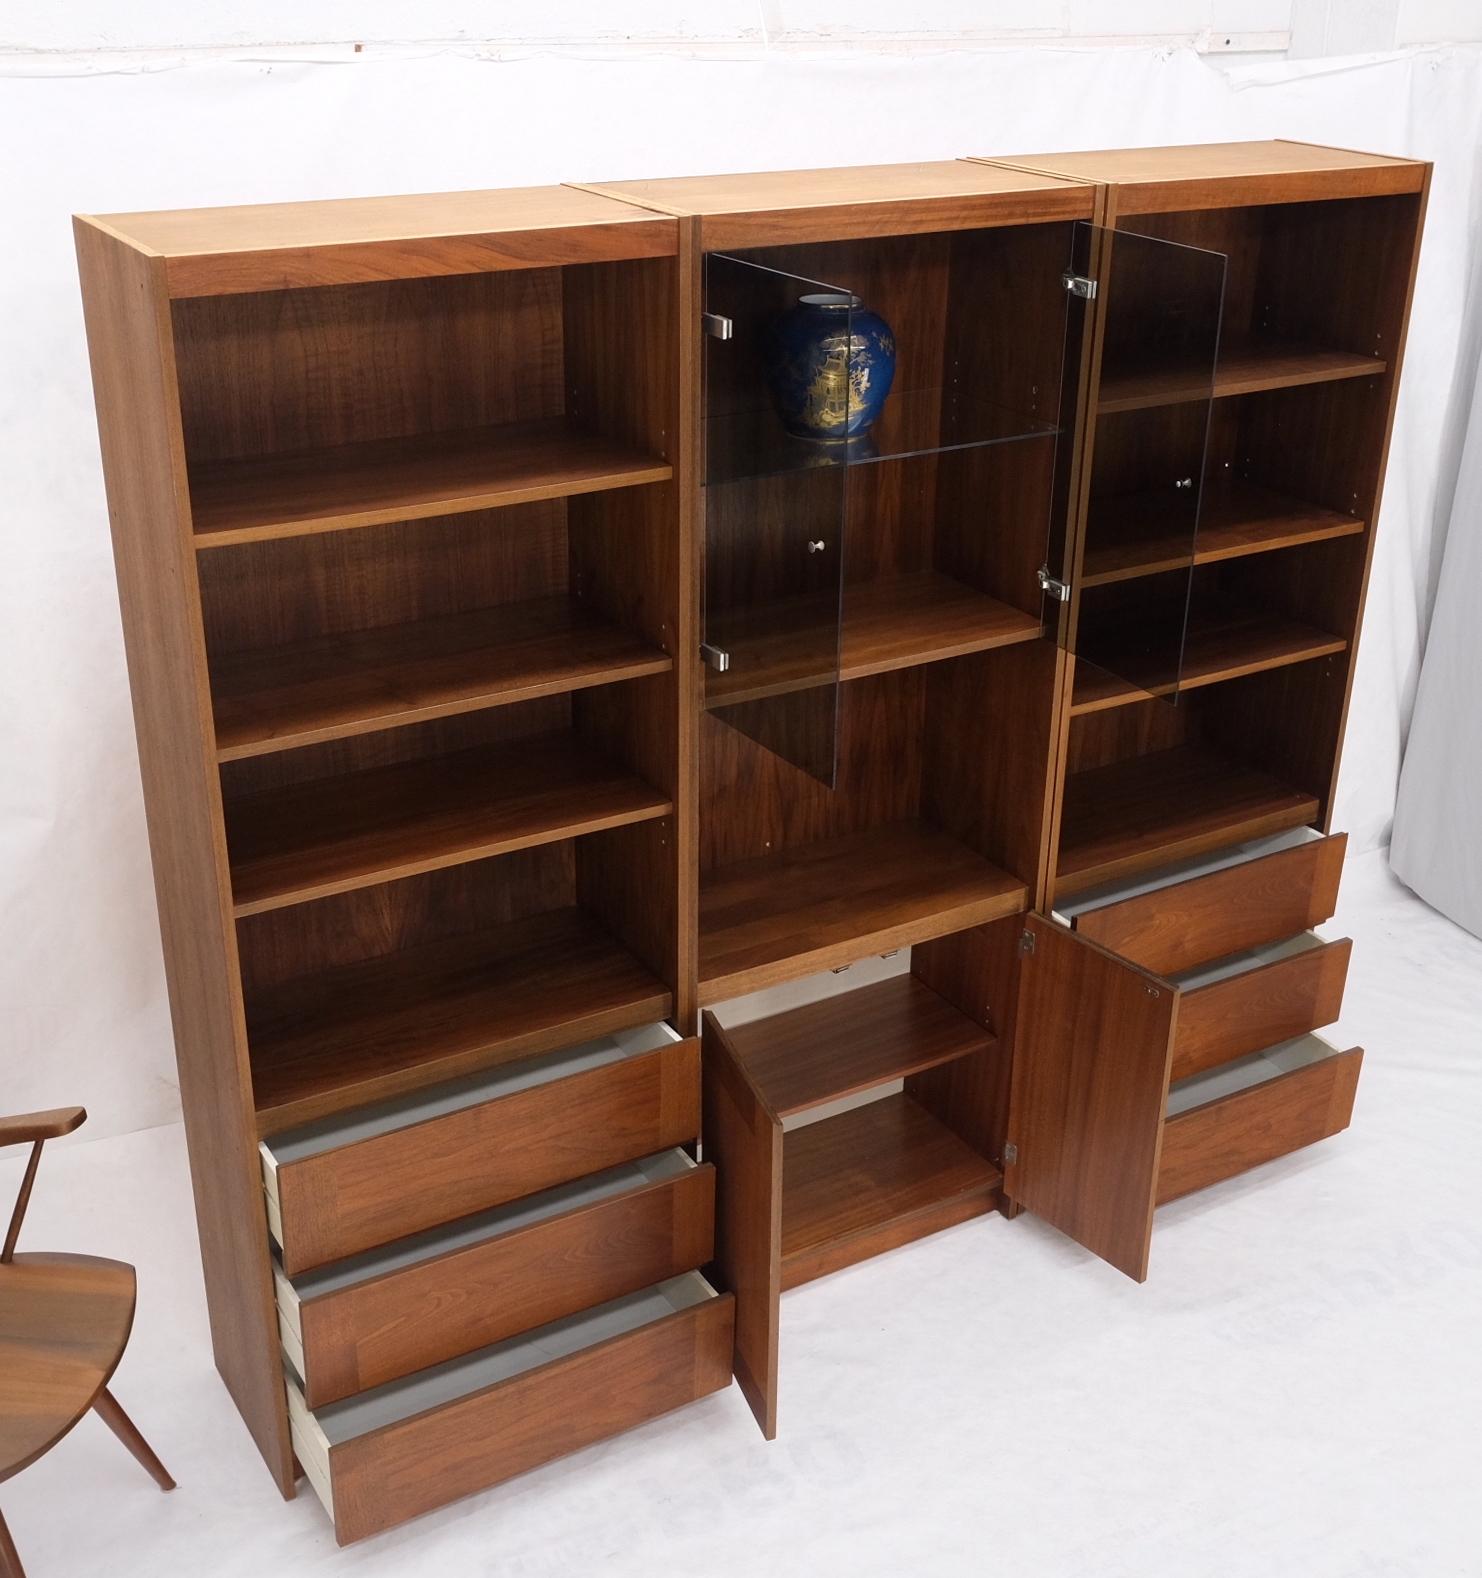 3 Bay Mid-Mentury Modern Walnut Glass Doors Bookcase Wall Unit Curio Cabinet For Sale 2